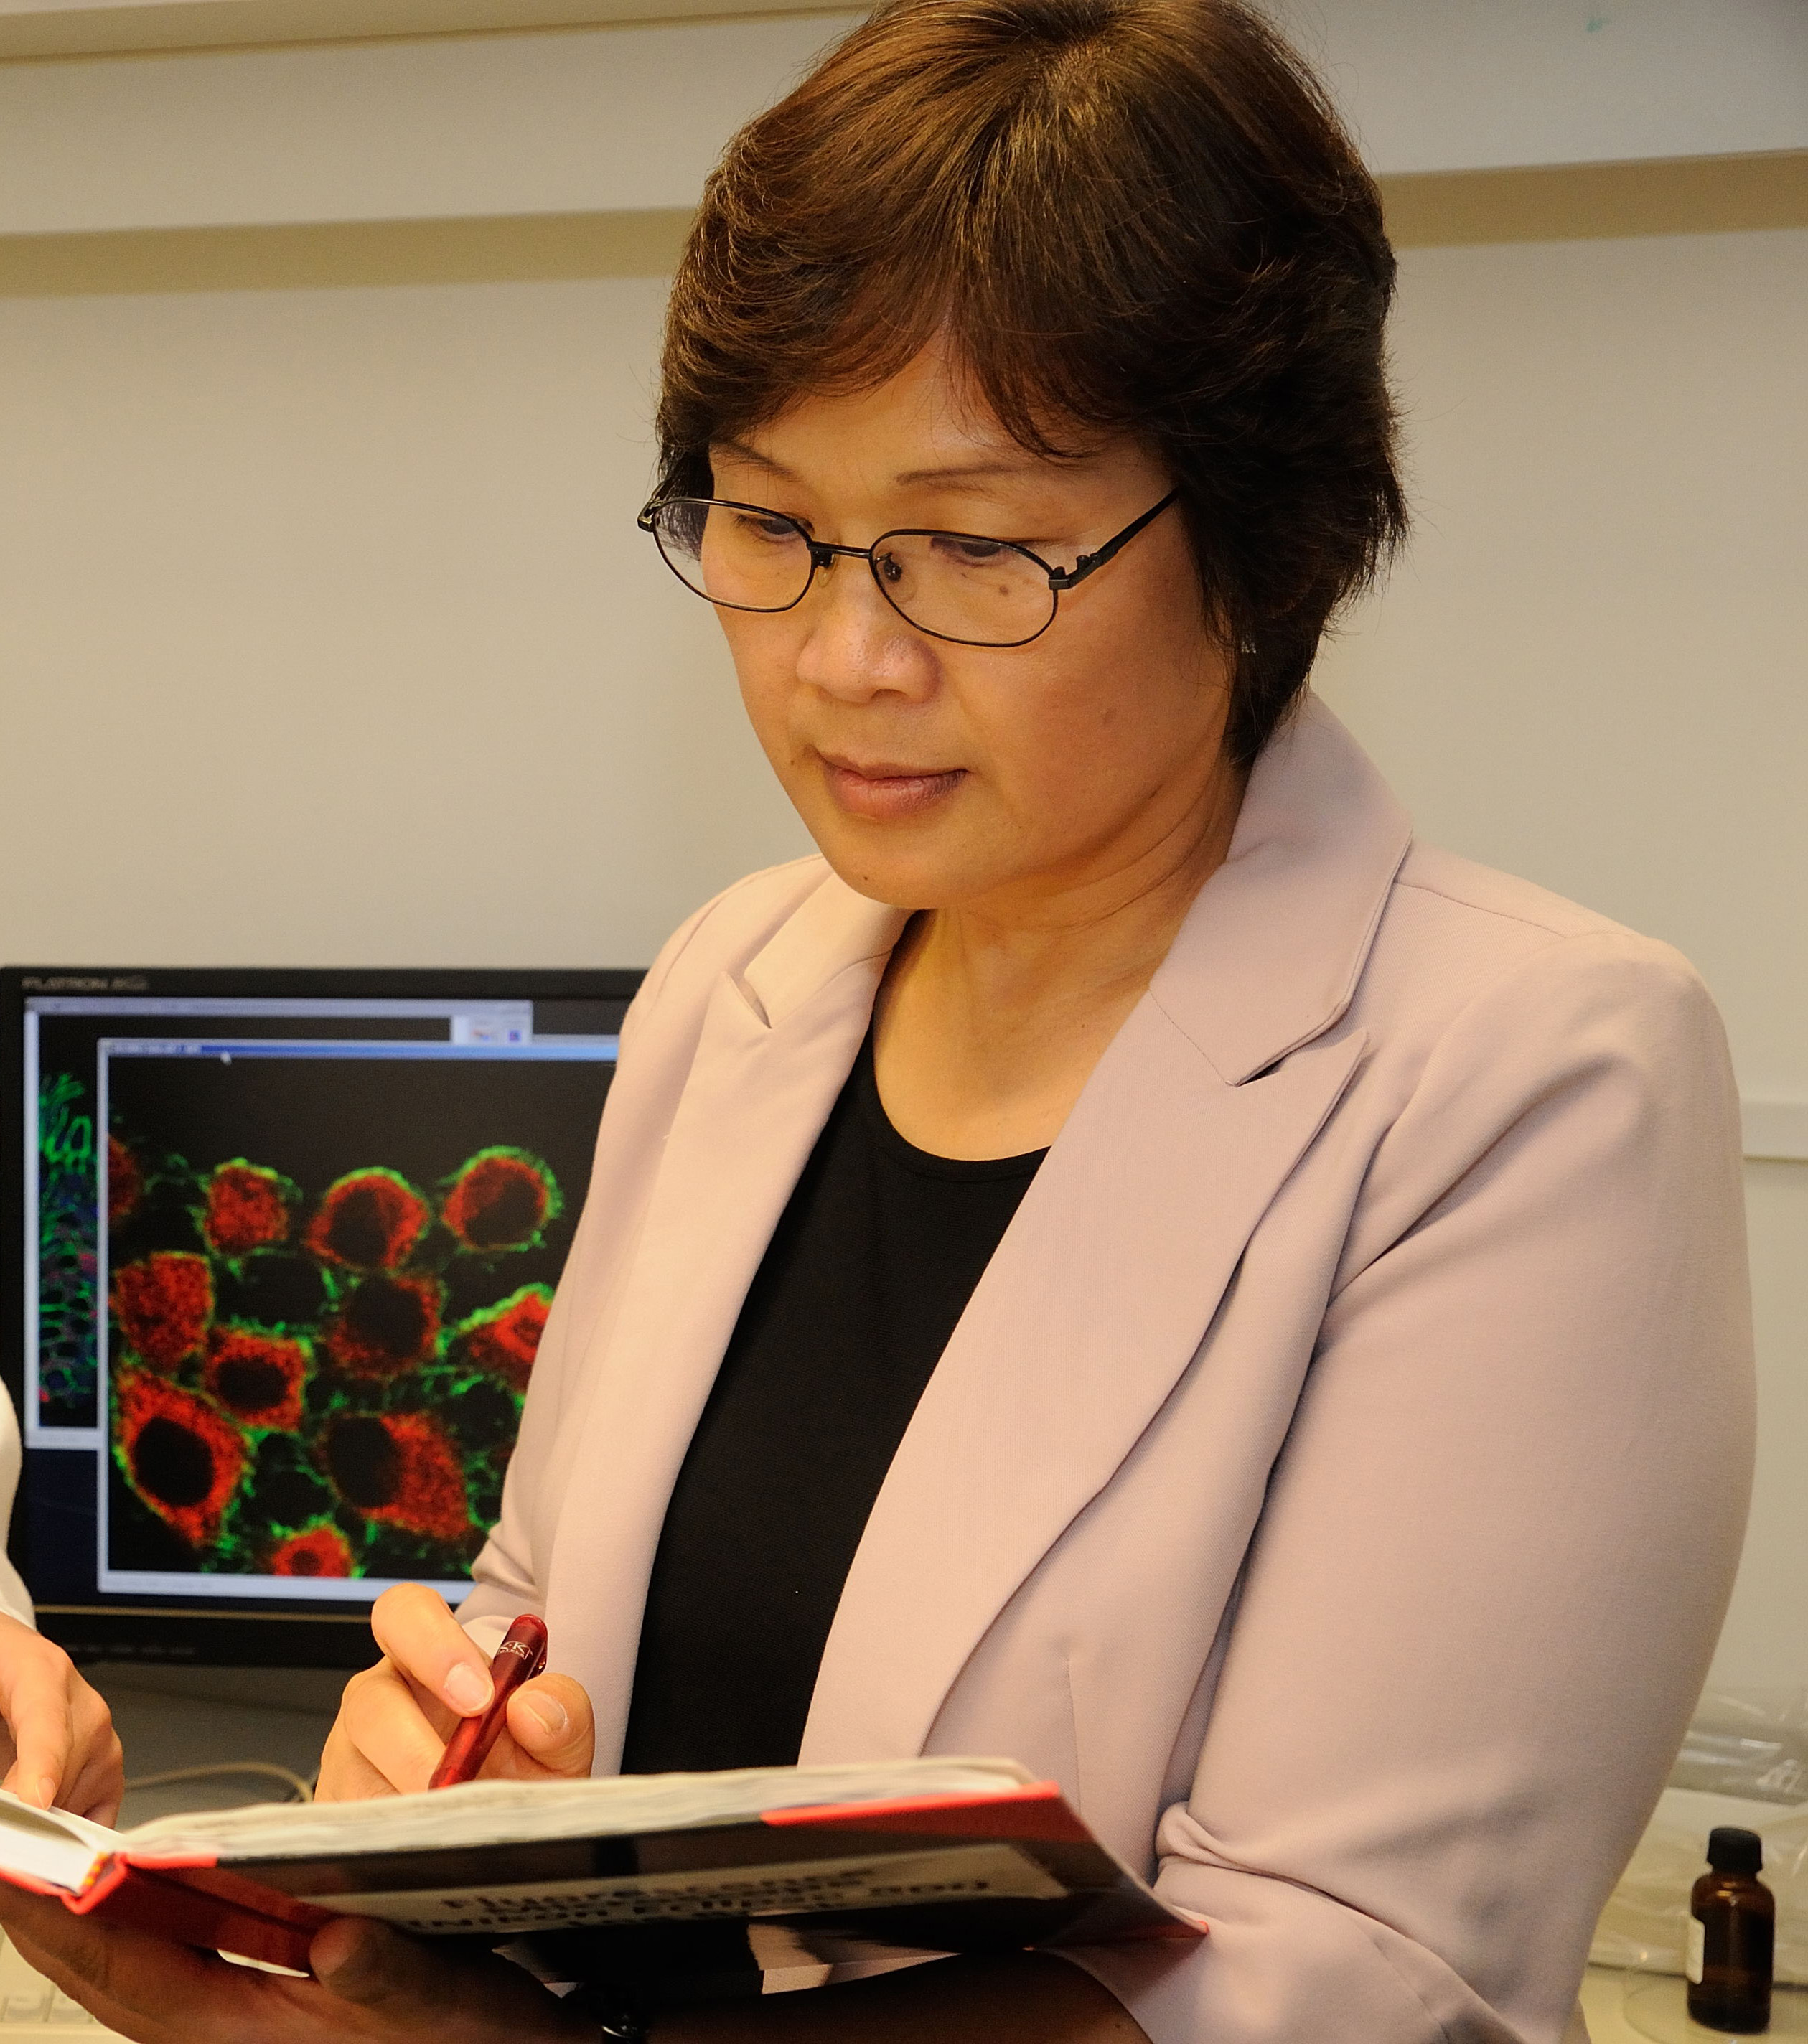 Professor CHAN Hsiao Chang, Professor of Physiology and Director of the Epithelial Cell Biology Research Centre, CUHK